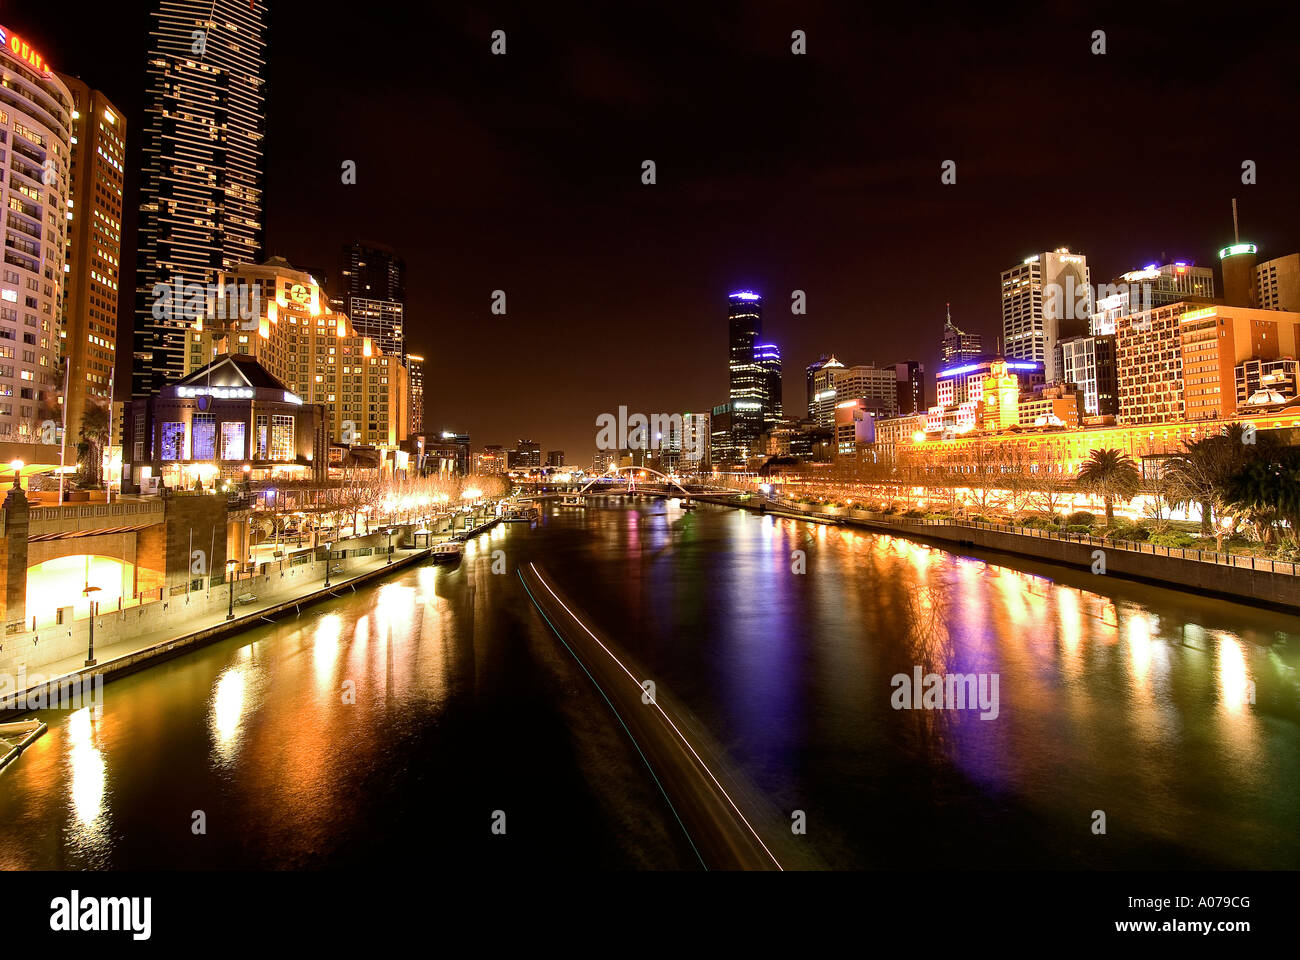 melbourne at night Stock Photo